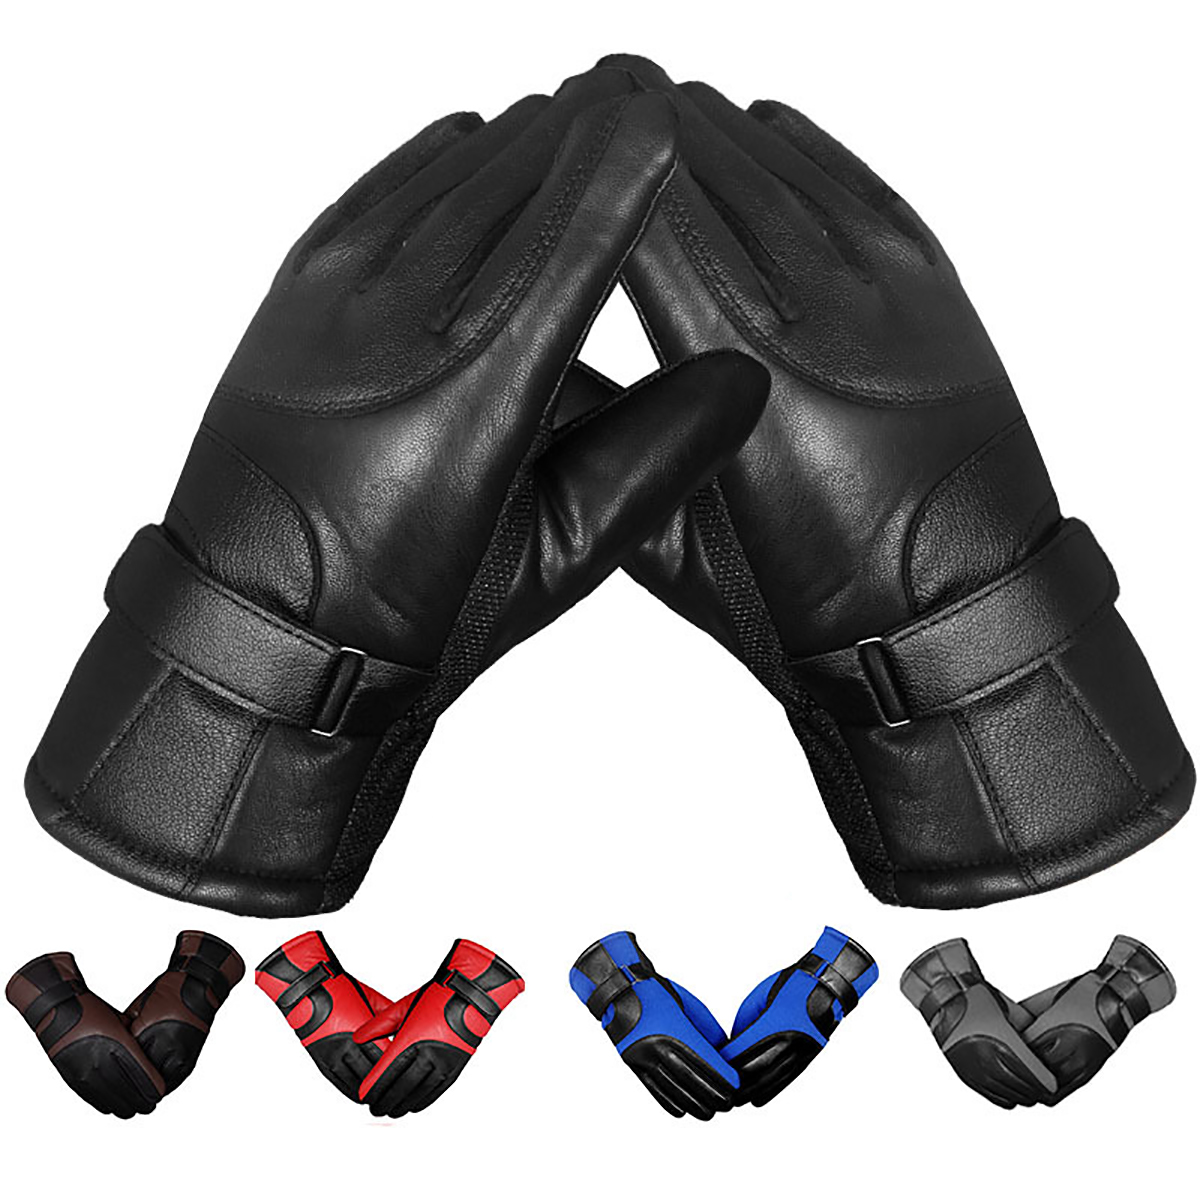 

Anti-slip Touch Screen/Leather Gloves Warmer Thermal Windproof Waterproof Skiing Motorcycle